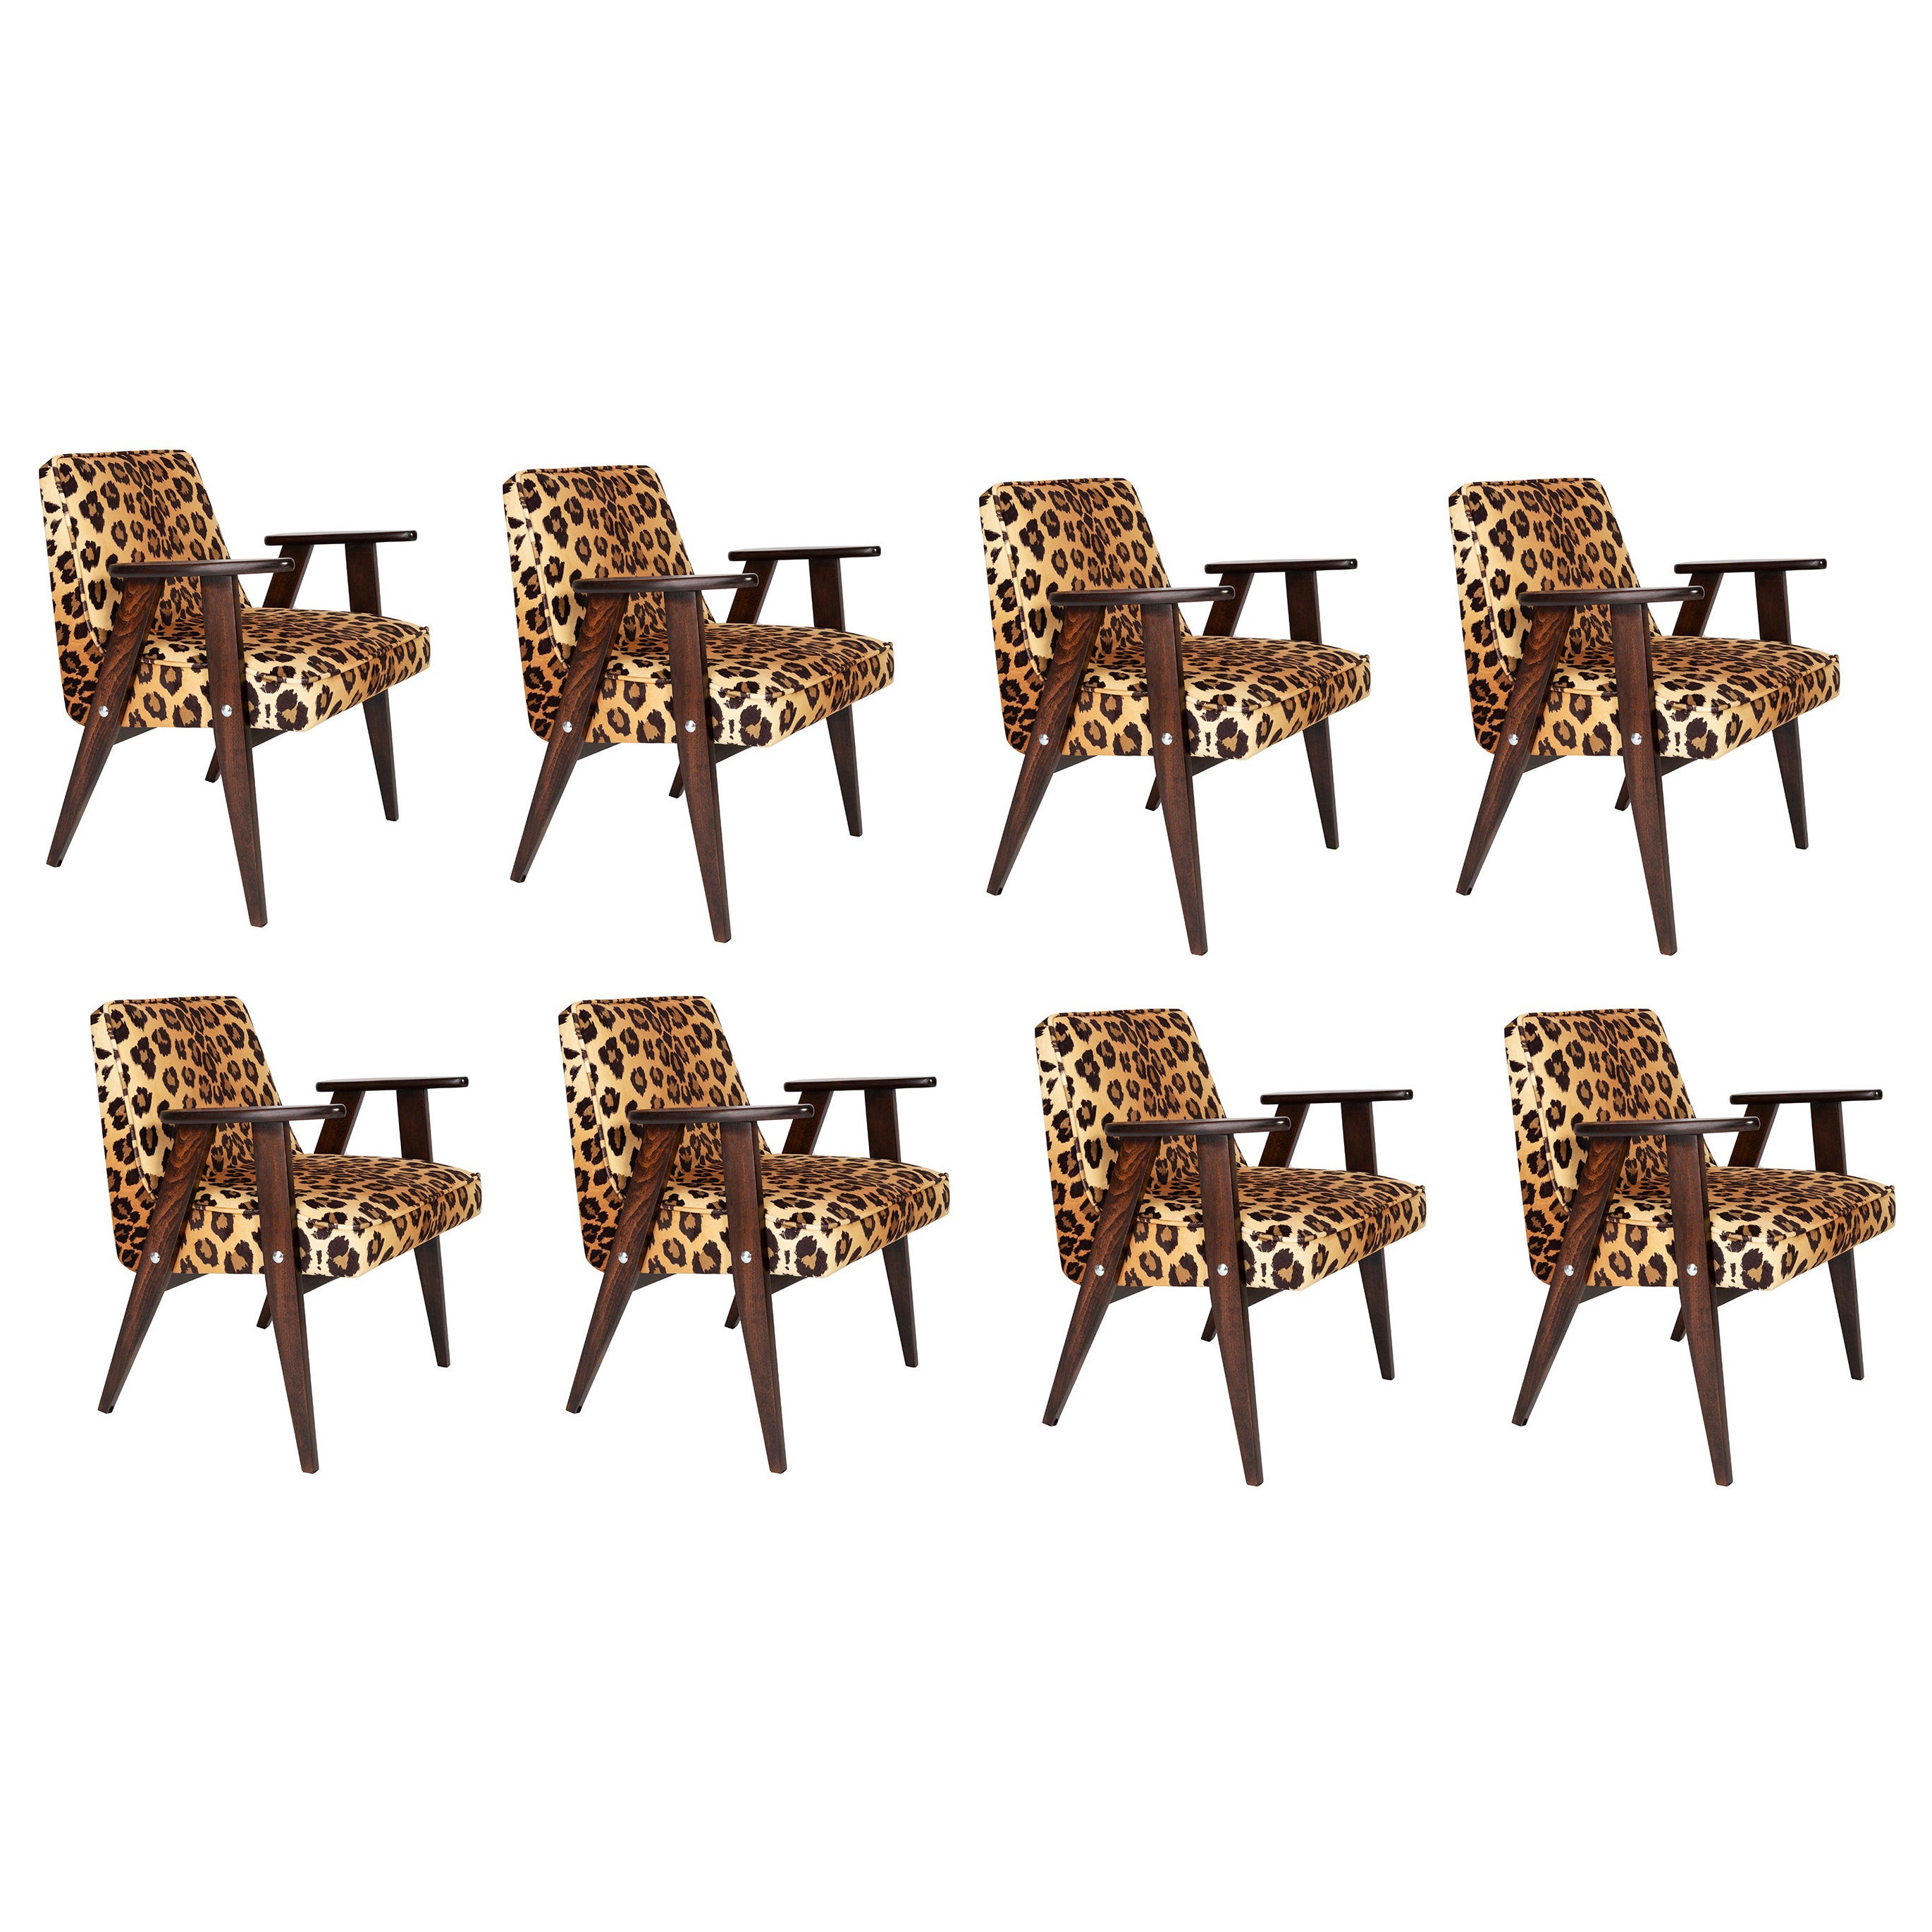 Eight Midcentury 366 Armchairs in Leopard Print Velvet, Jozef Chierowski, 1960s For Sale